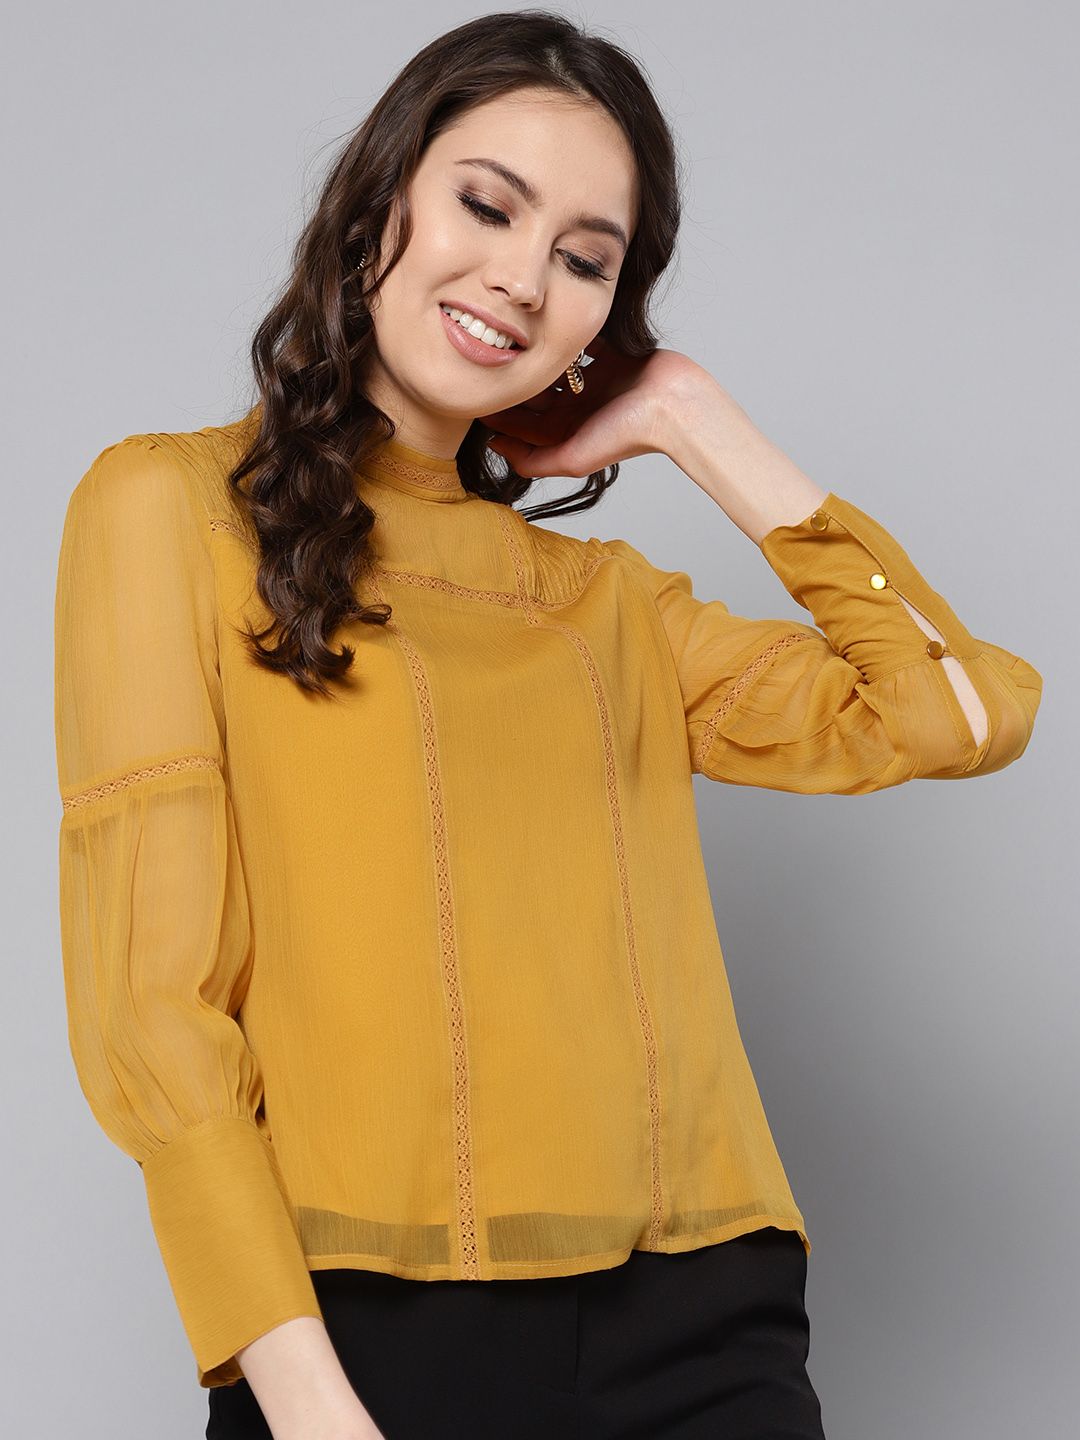 Marie Claire Mustard Yellow Lace Inserts Top Price in India